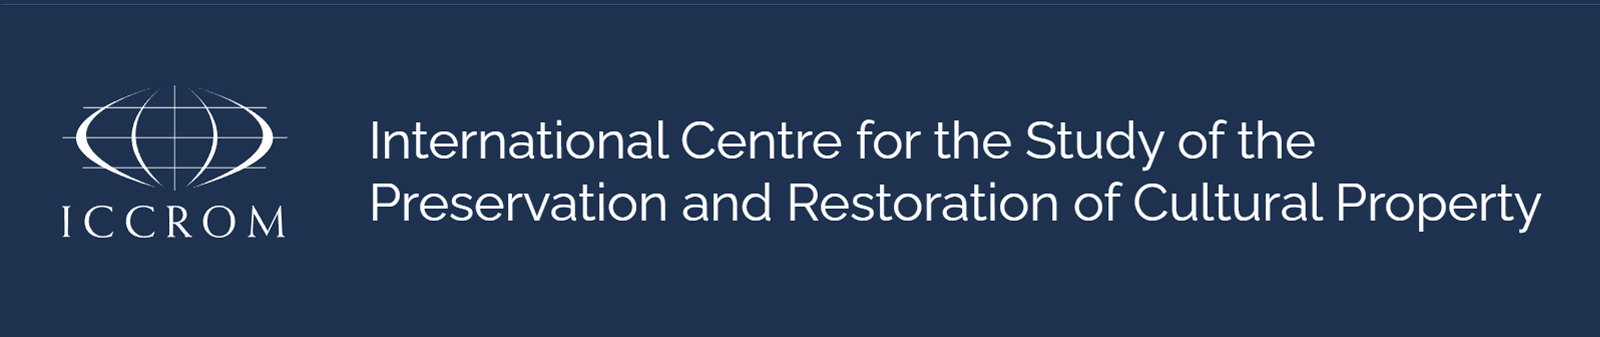 International Centre for the Study of the Preservation and Restoration of Cultural Property